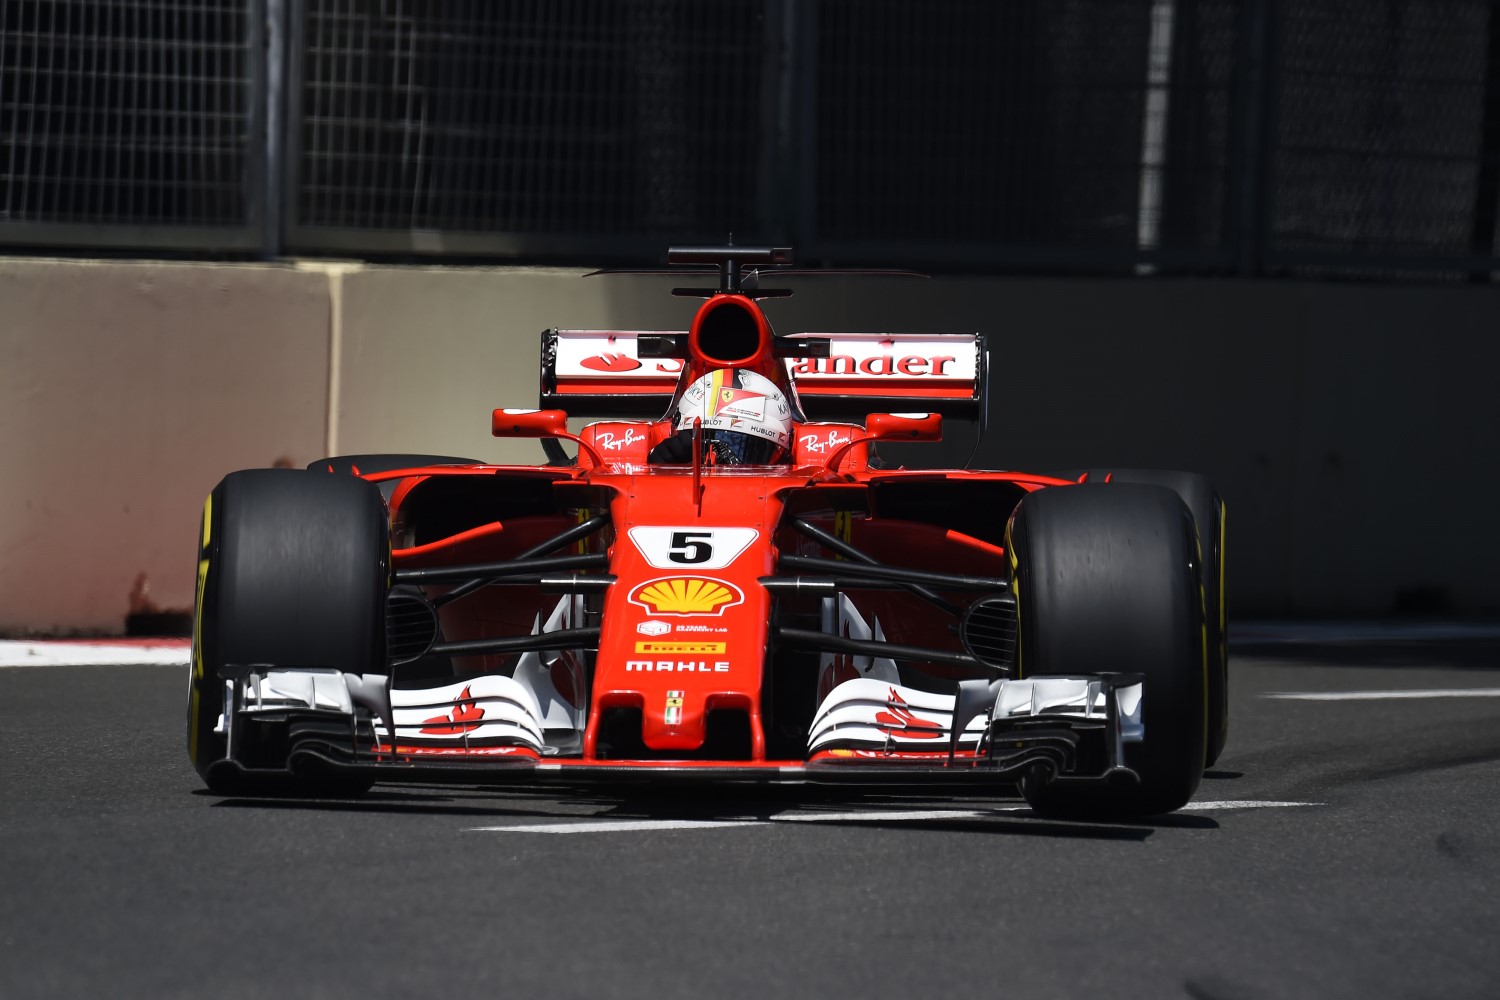 Vettel not happy with performance